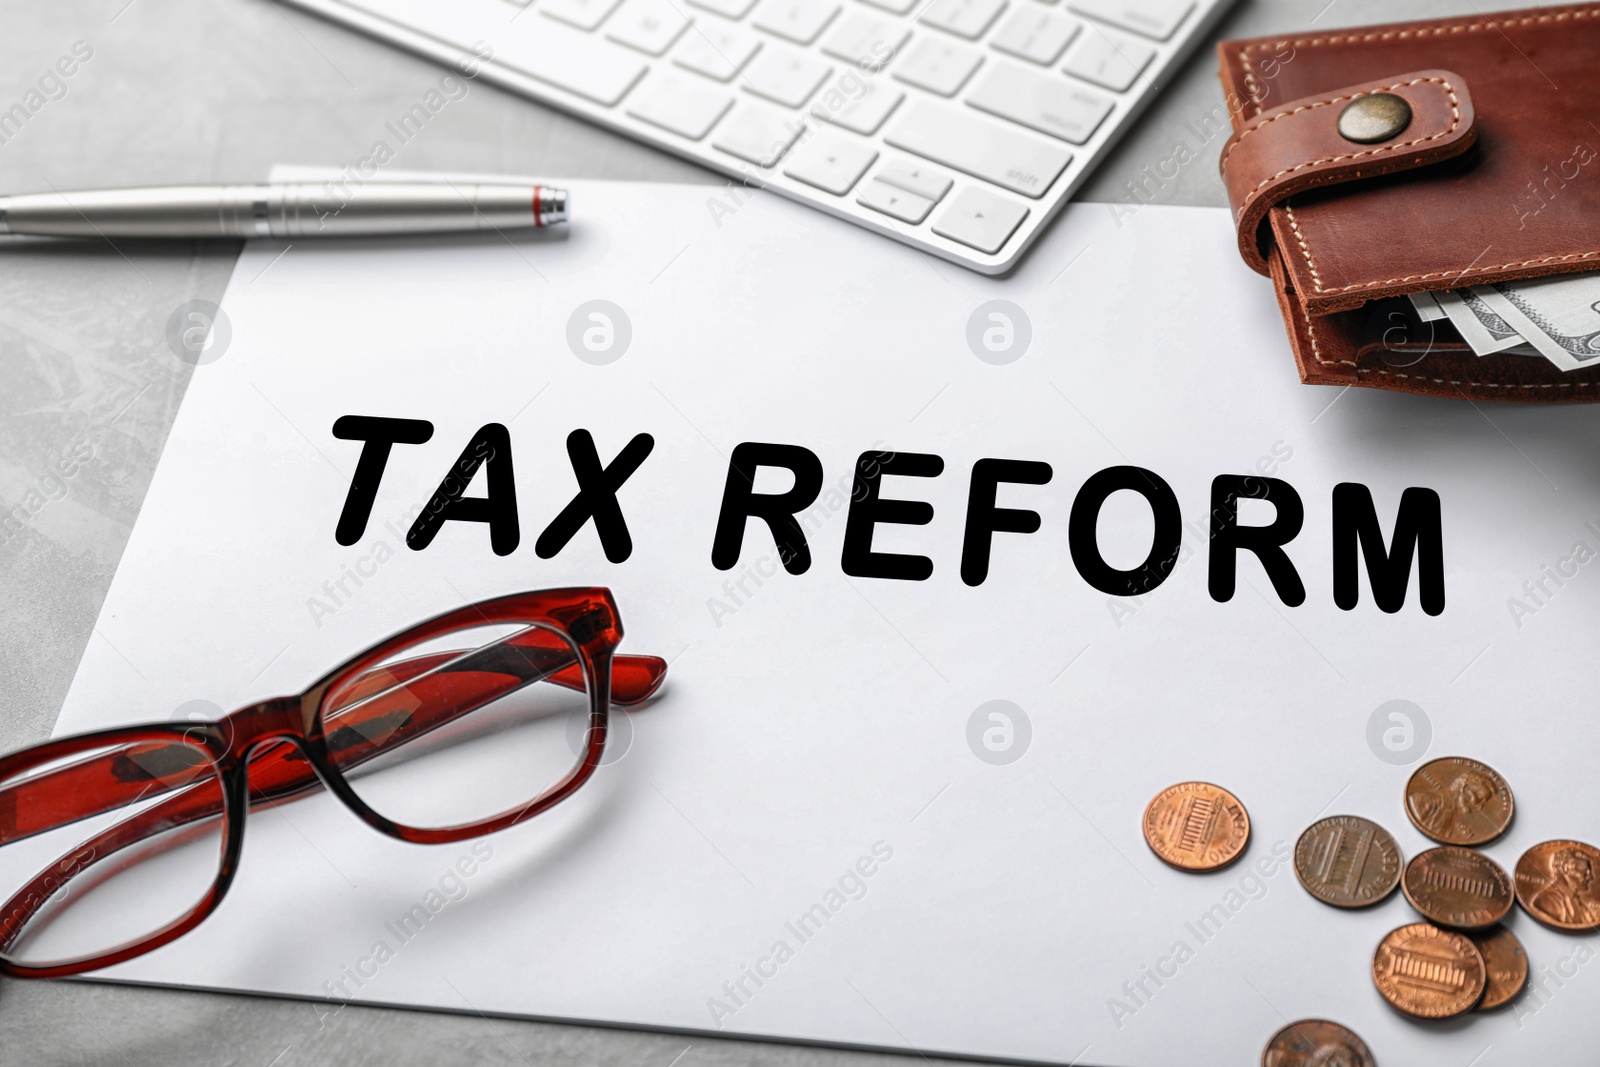 Image of Composition of paper with words TAX REFORM, glasses and money on table